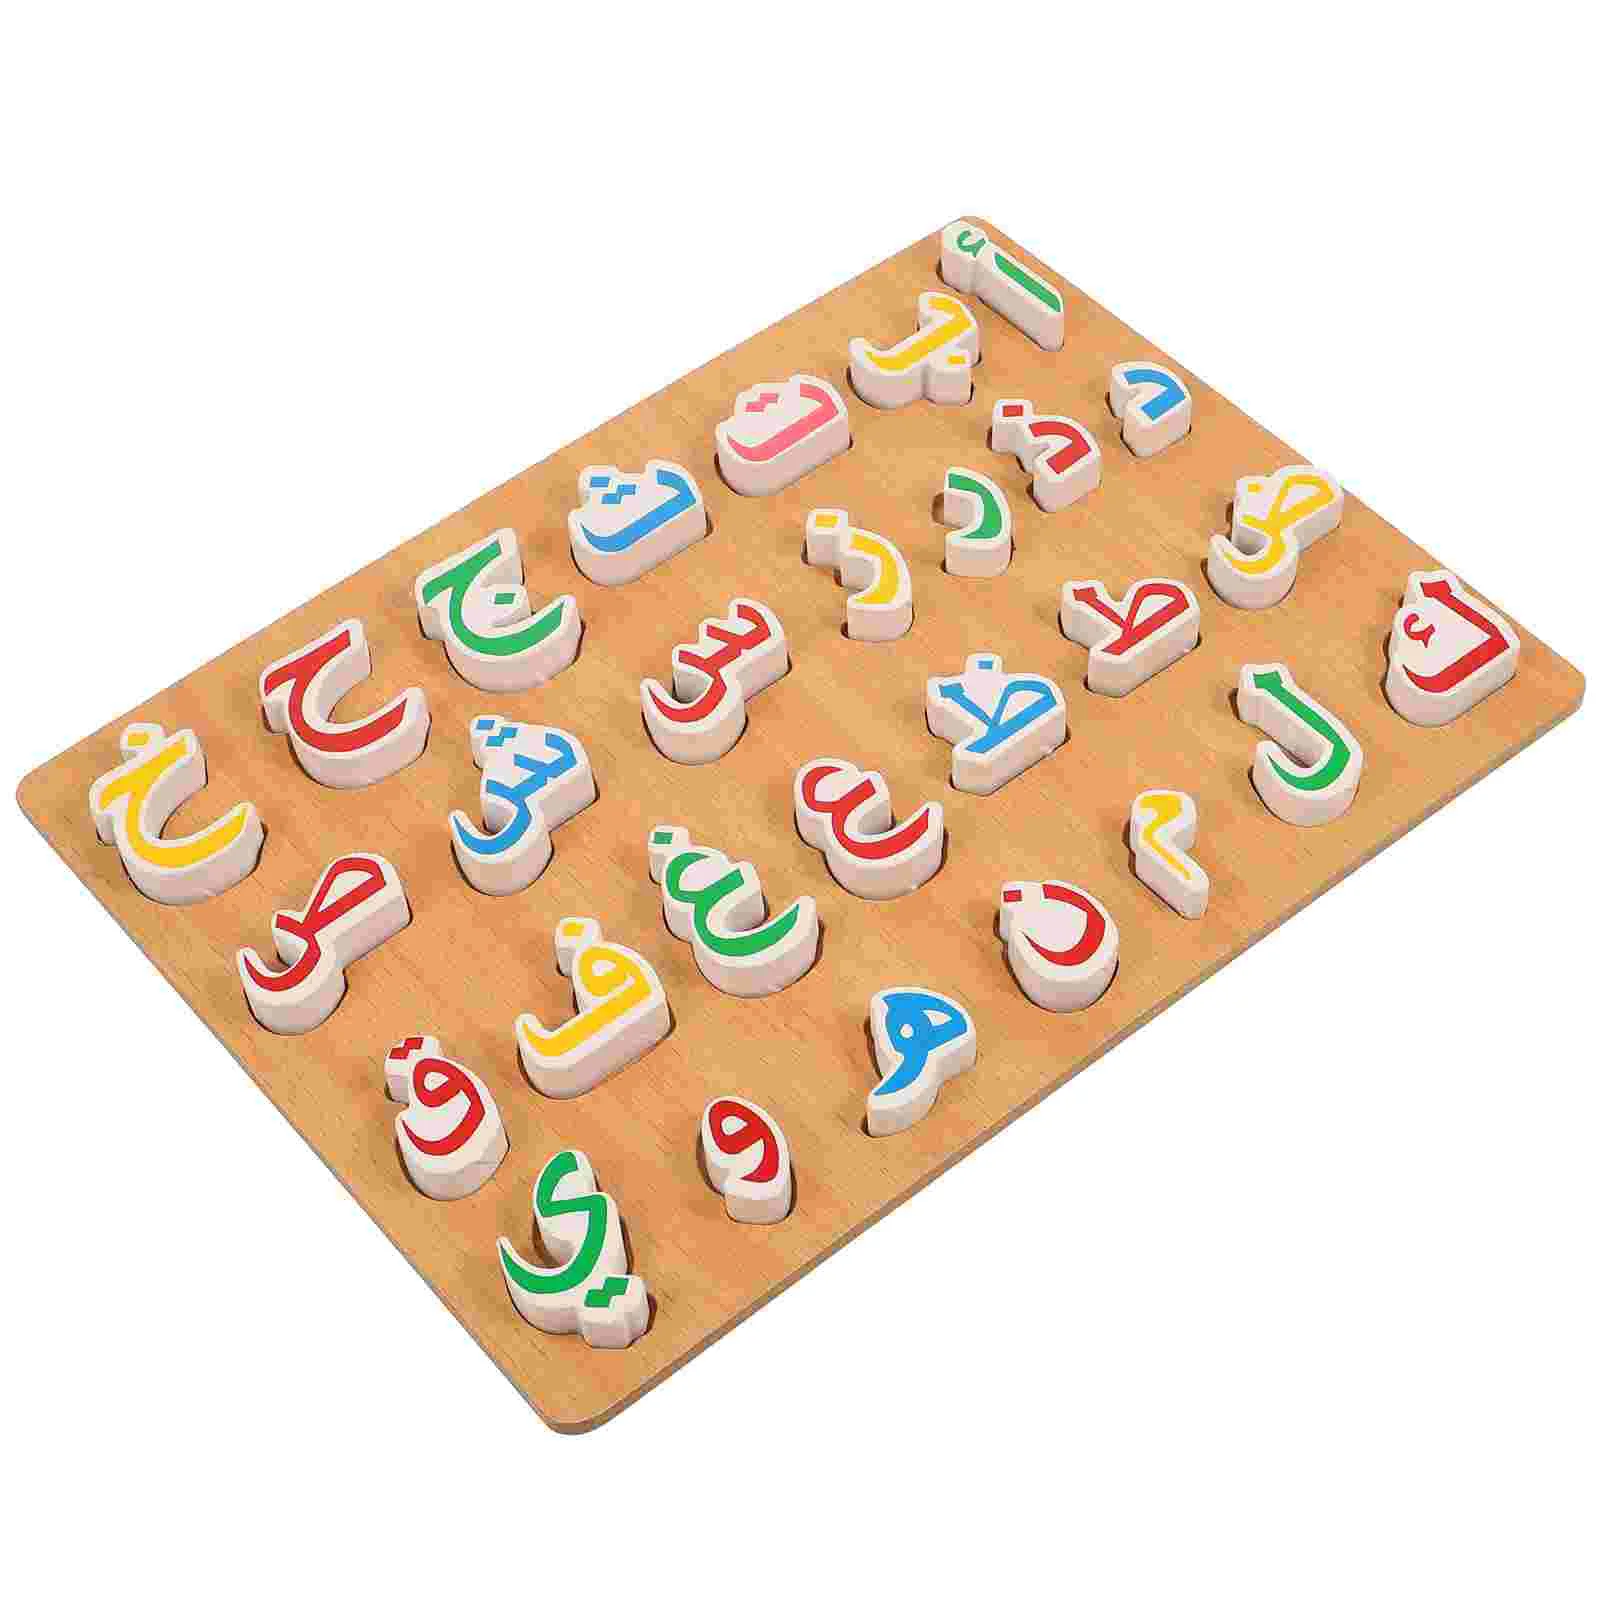 

Arabic Puzzle Logic Plaything Logical Jigsaw Wooden Toy Children Kids Early Educational Matching Girl Toys Alphabets